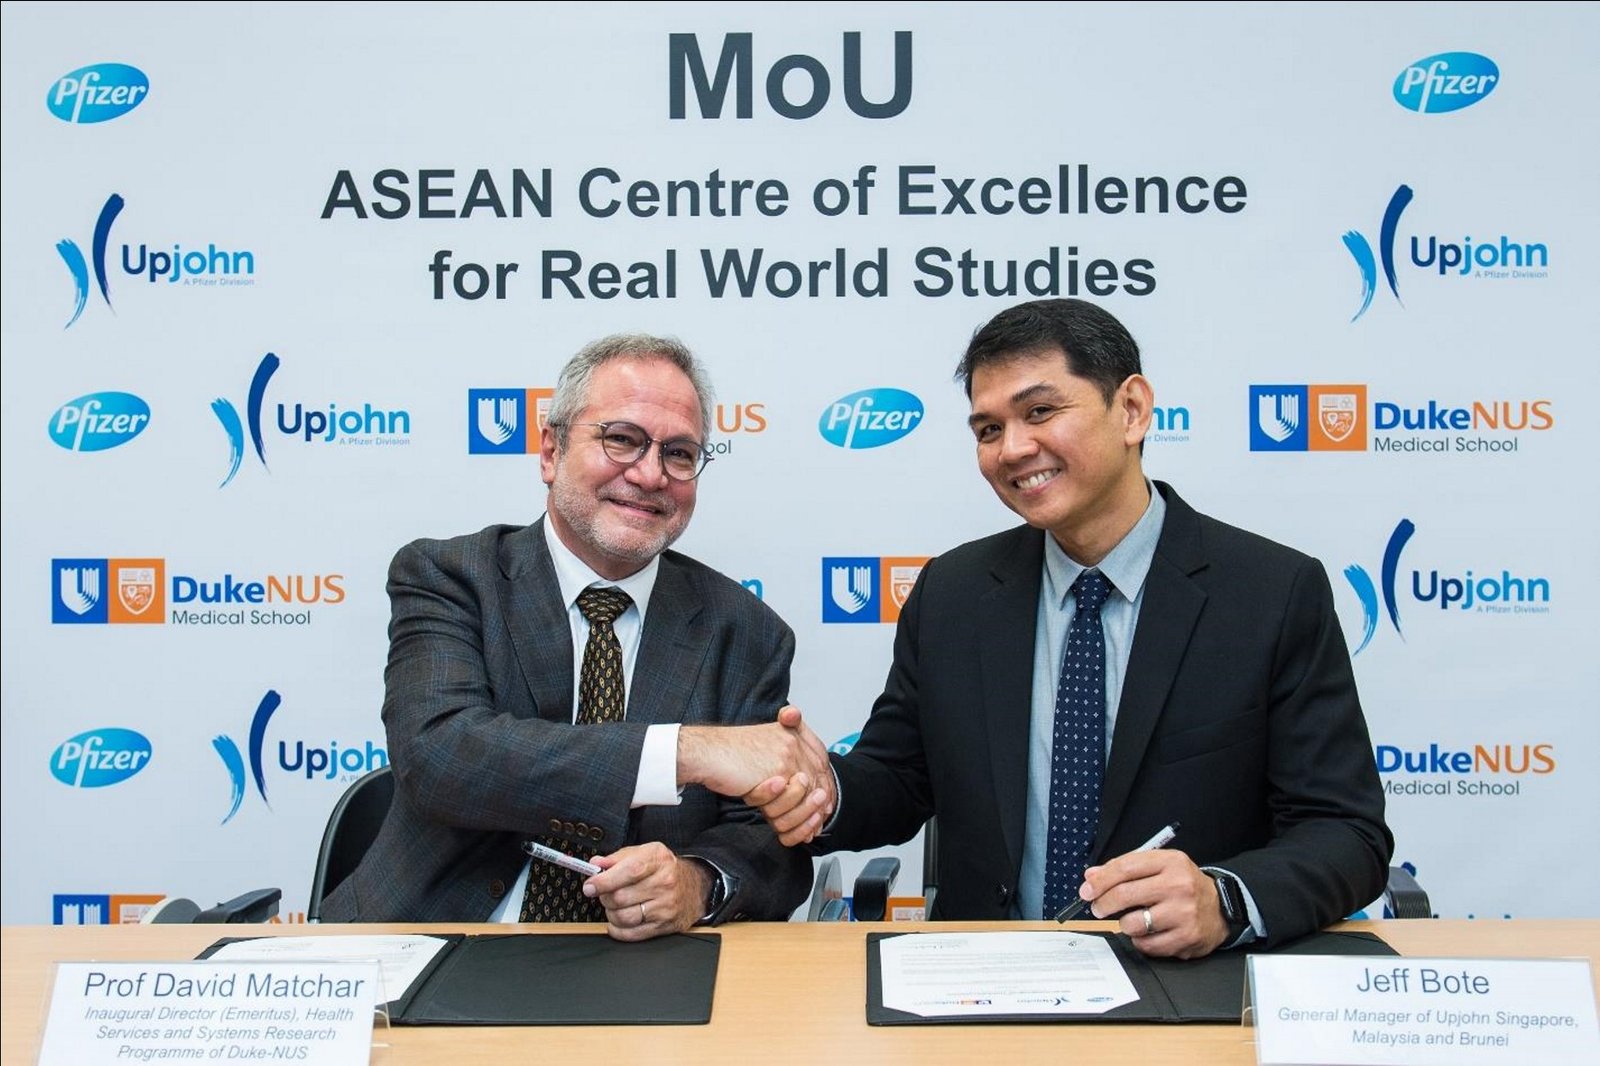 Prof David Matchar, Inaugural Director (Emeritus), Health Services and Systems Research Programme of Duke-NUS and   Jeff Bote, General Manager of Upjohn Singapore, Malaysia and Brunei signs MoU to set up ASEAN Centre of Excellence for Real World Evidence (RWE) Studies 